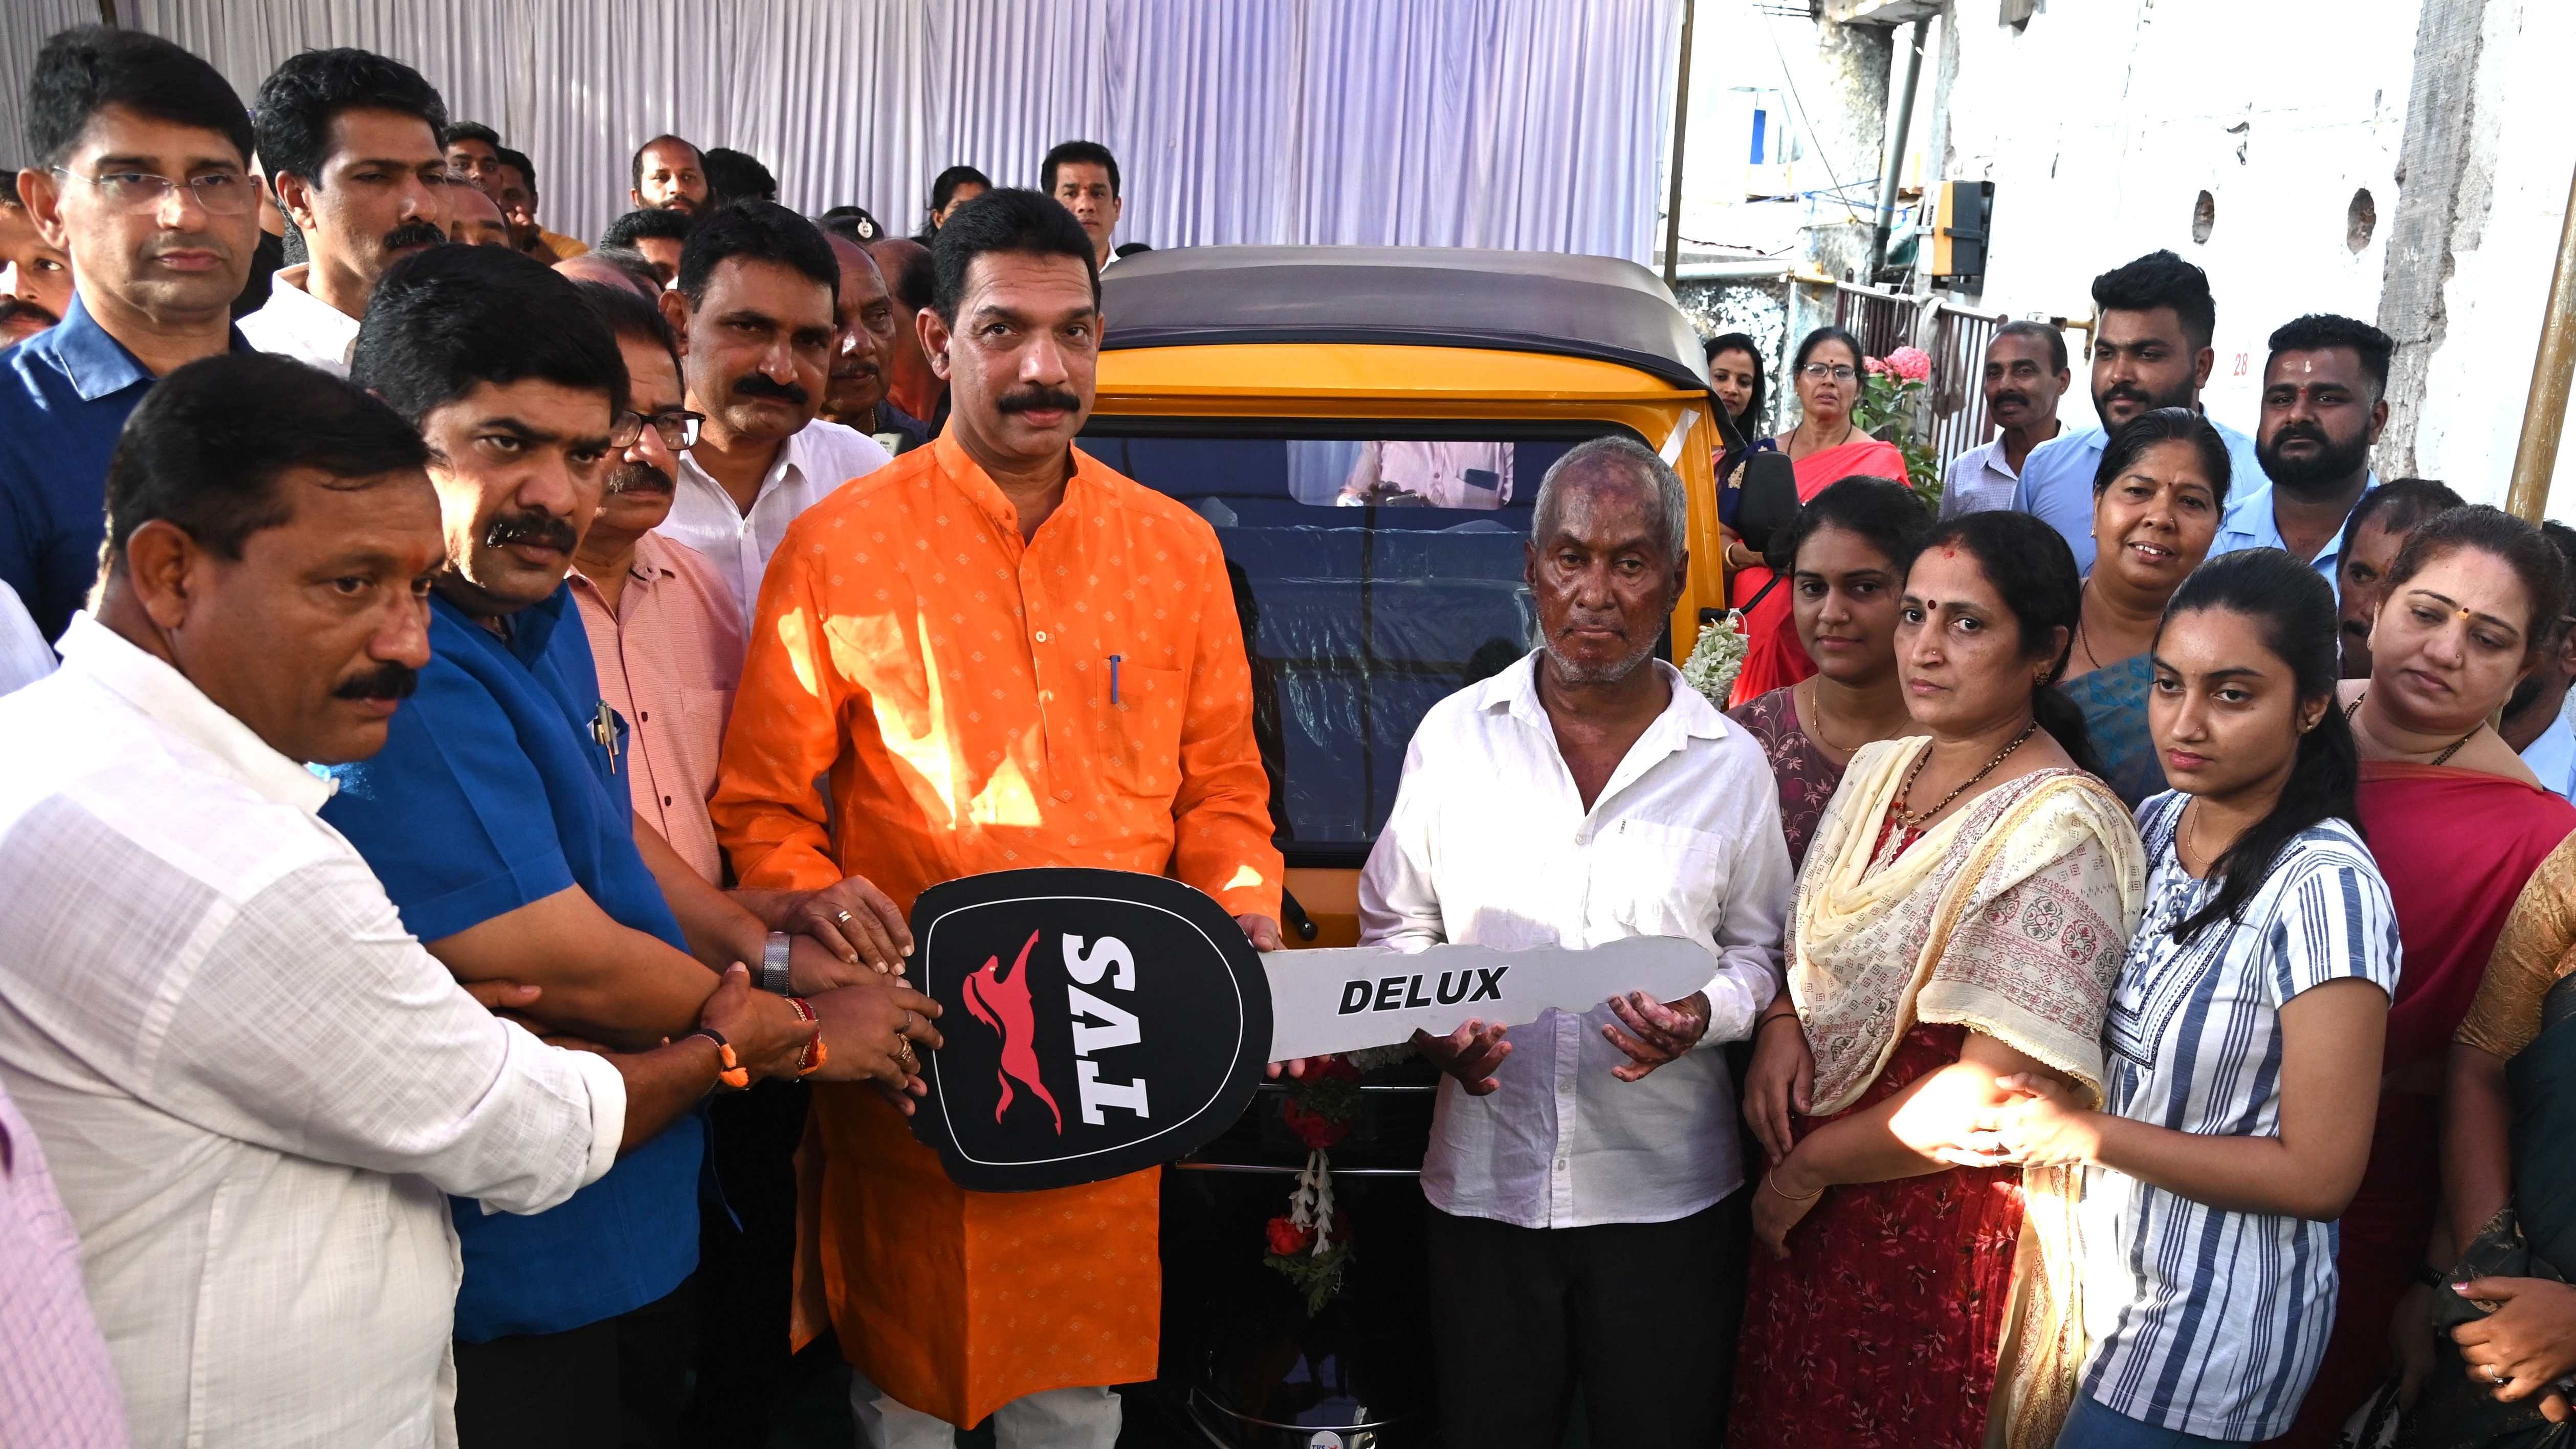 BJP state president Nalin Kumar Kateel hands over an auto rickshaw to auto driver Purushotham Poojary, who suffered injuries in the cooker blast, in Mangaluru on Sunday. DH Photo